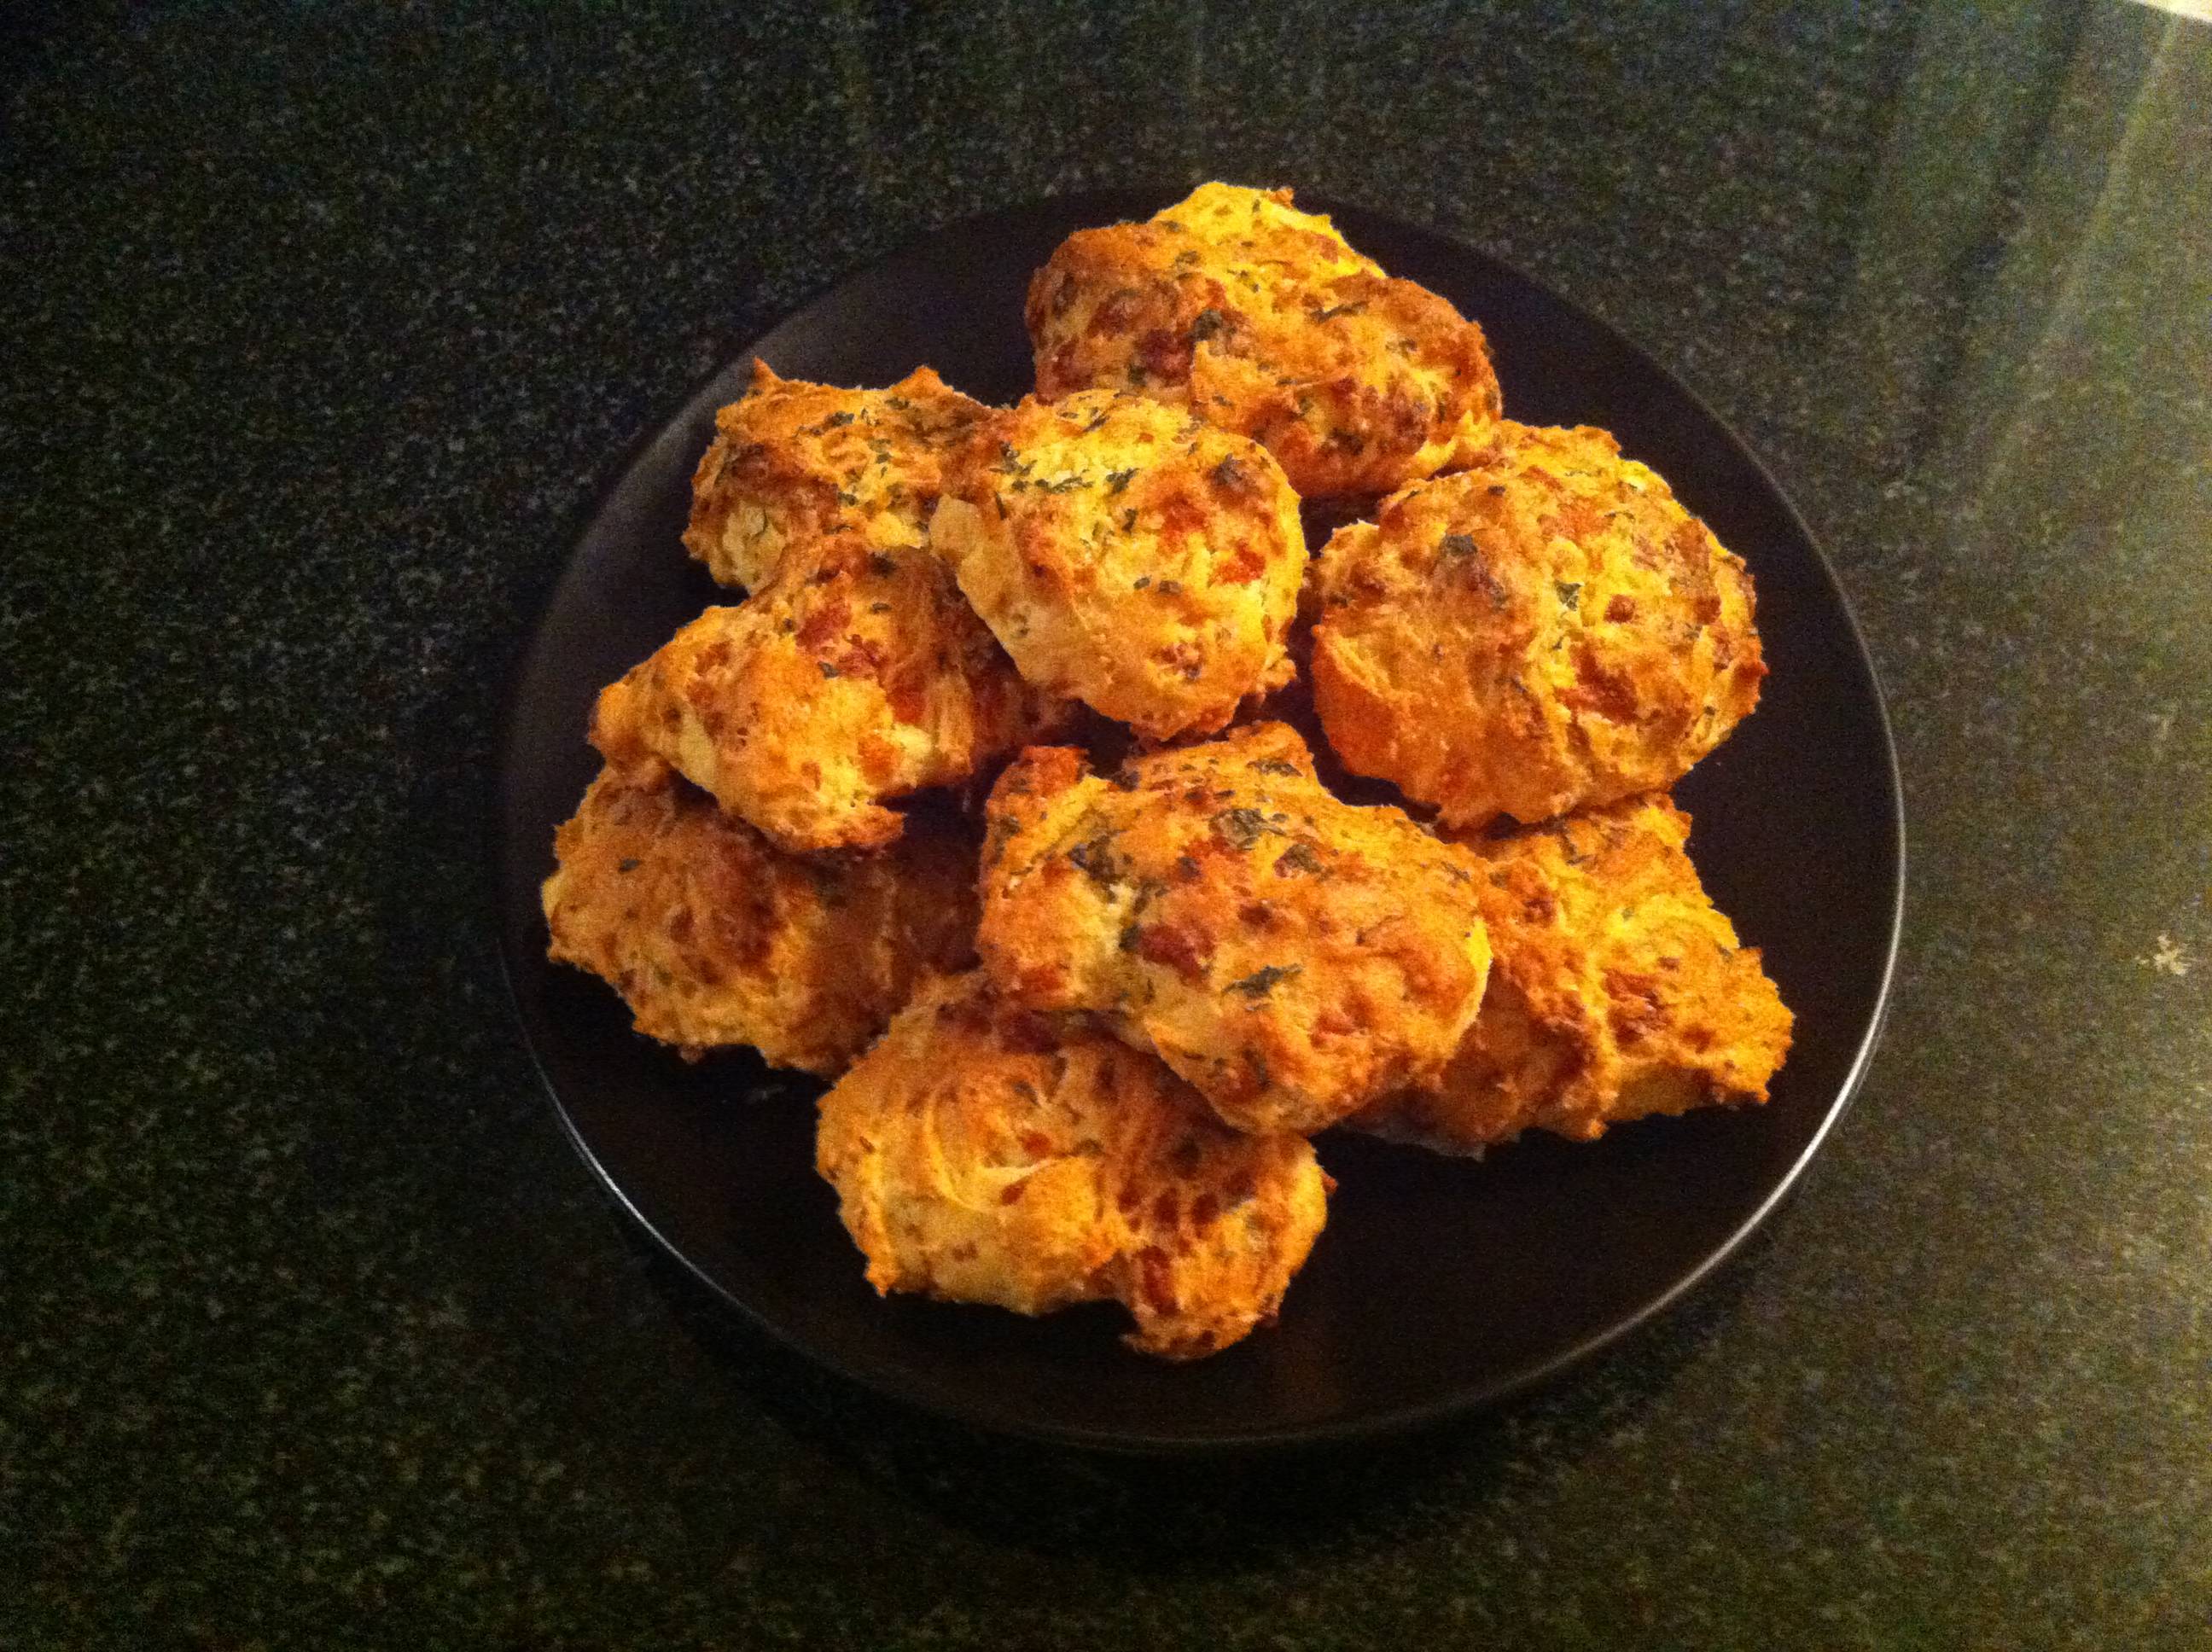 Cheddar biscuits plated and stacked